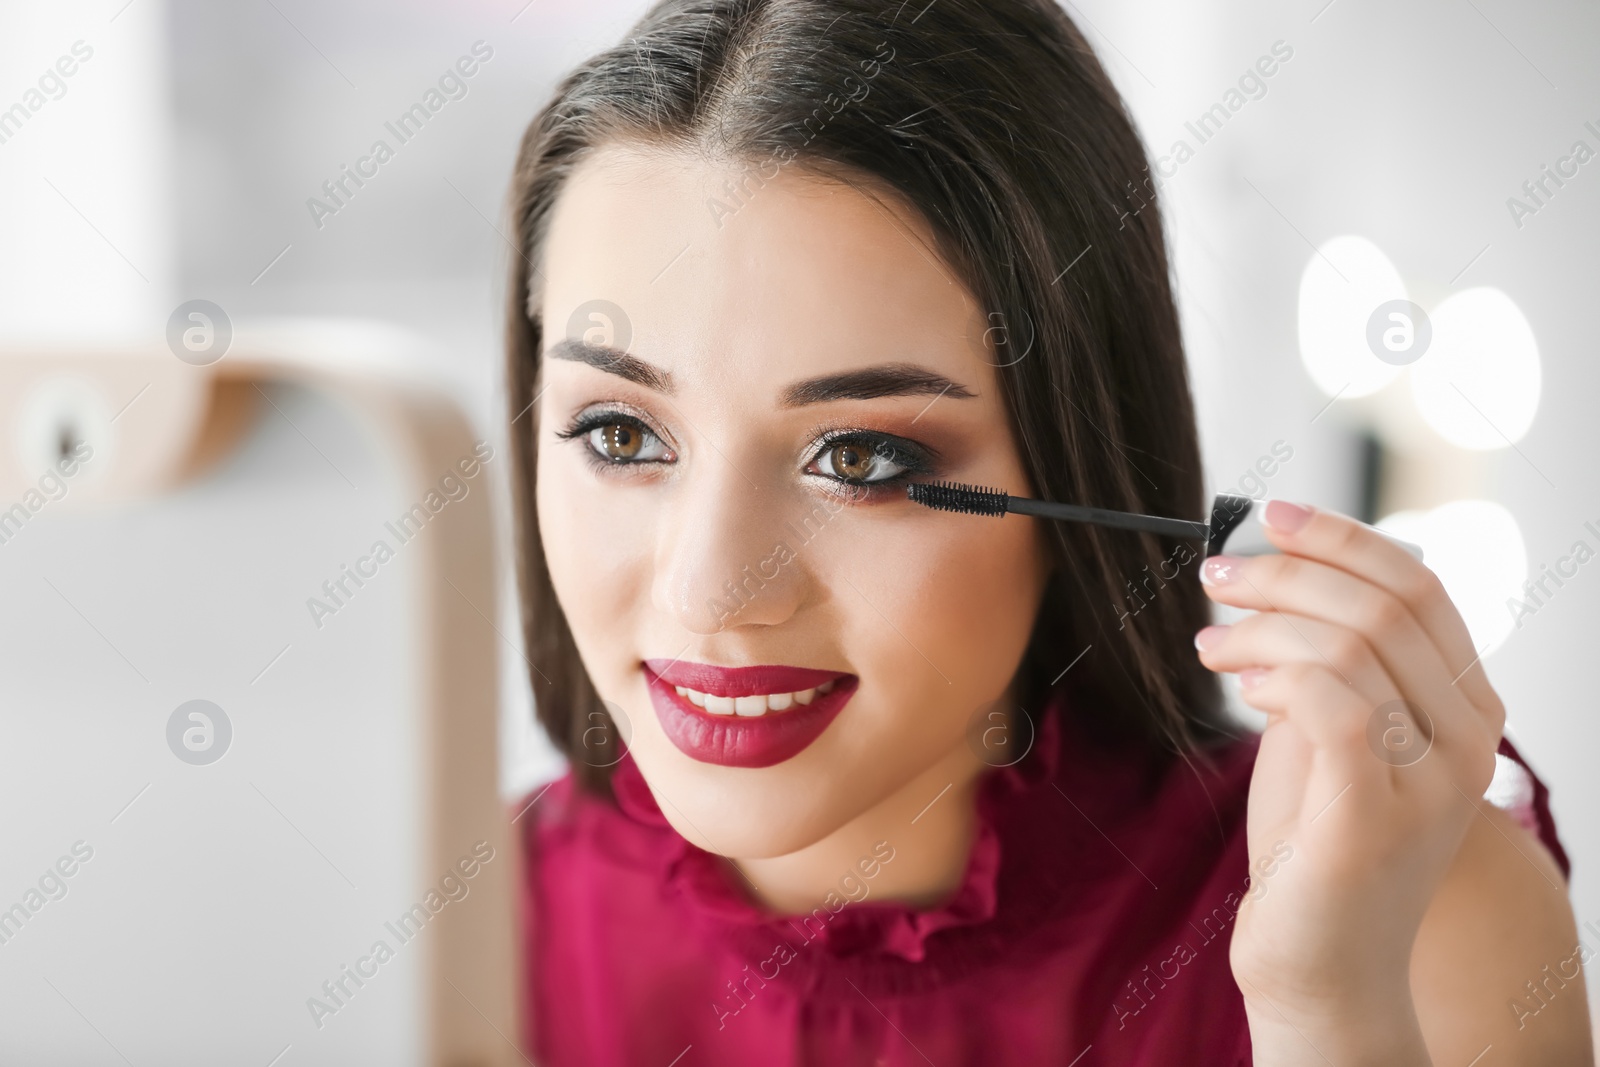 Photo of Portrait of beautiful woman applying makeup on blurred background